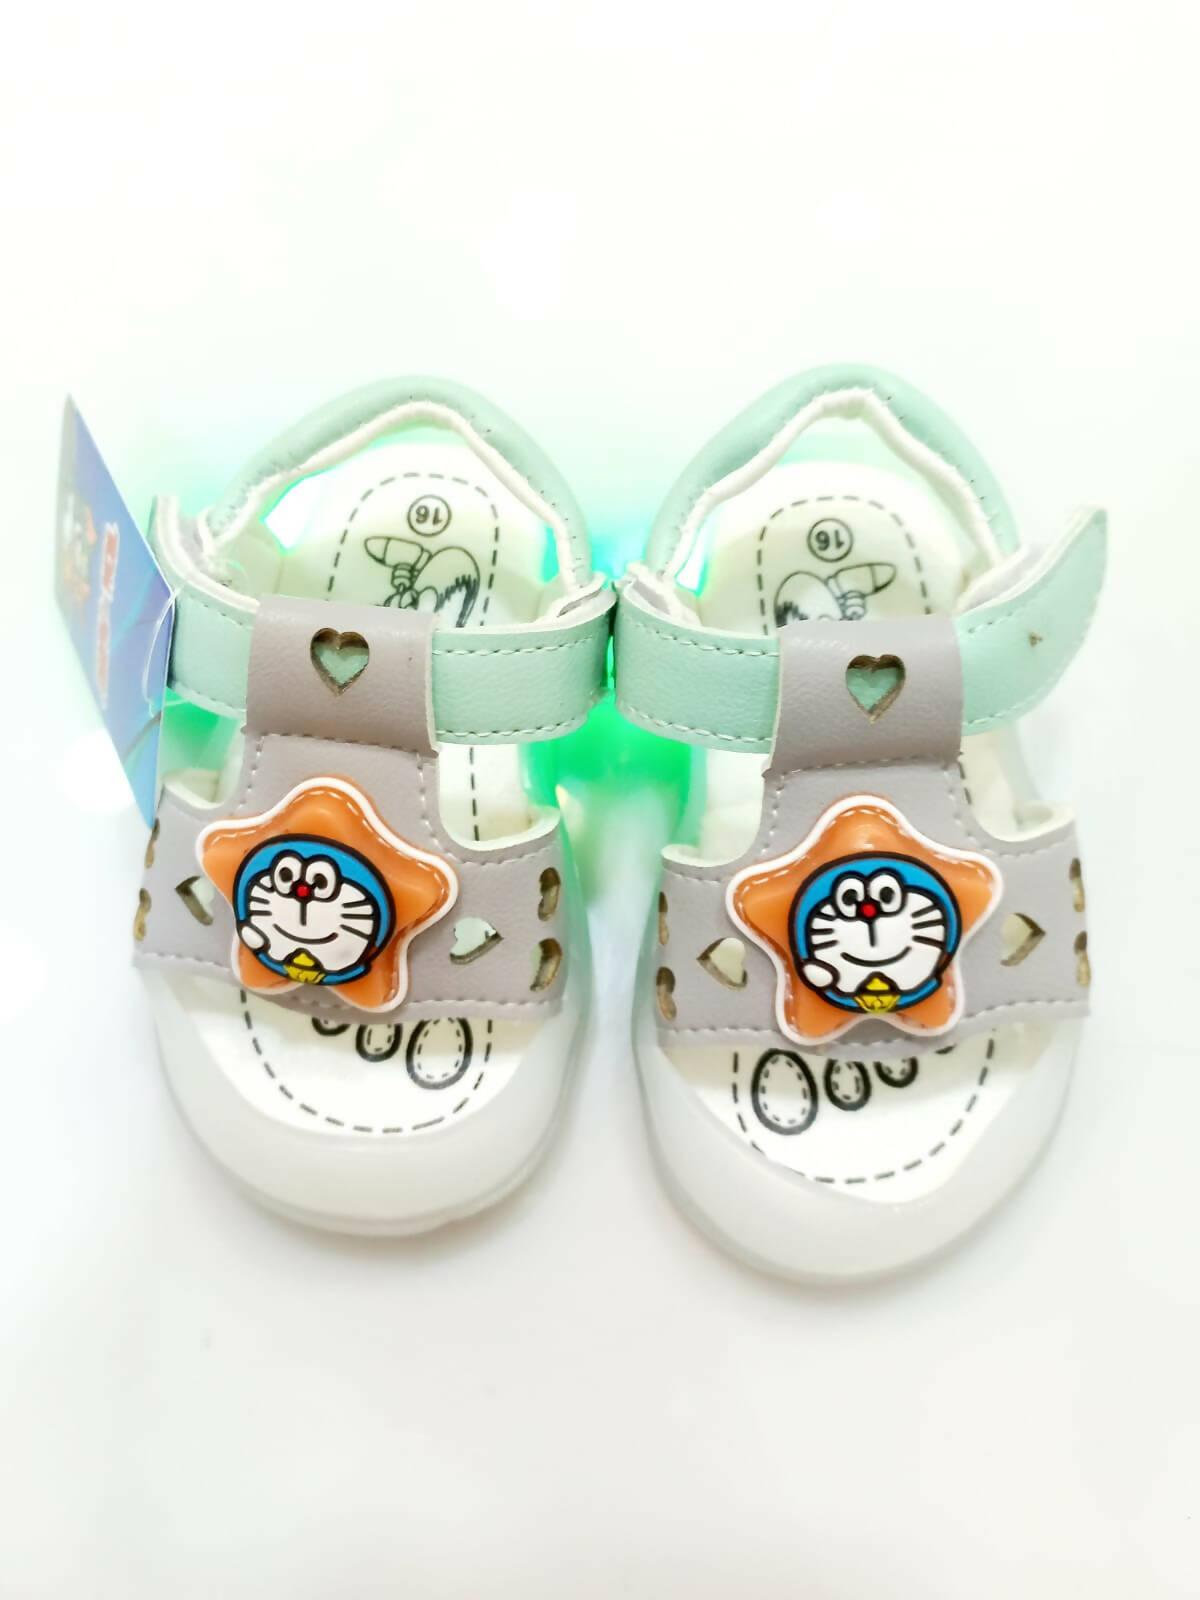 Latest Arrival Sandals for Kids Soft & Comfortable - ValueBox